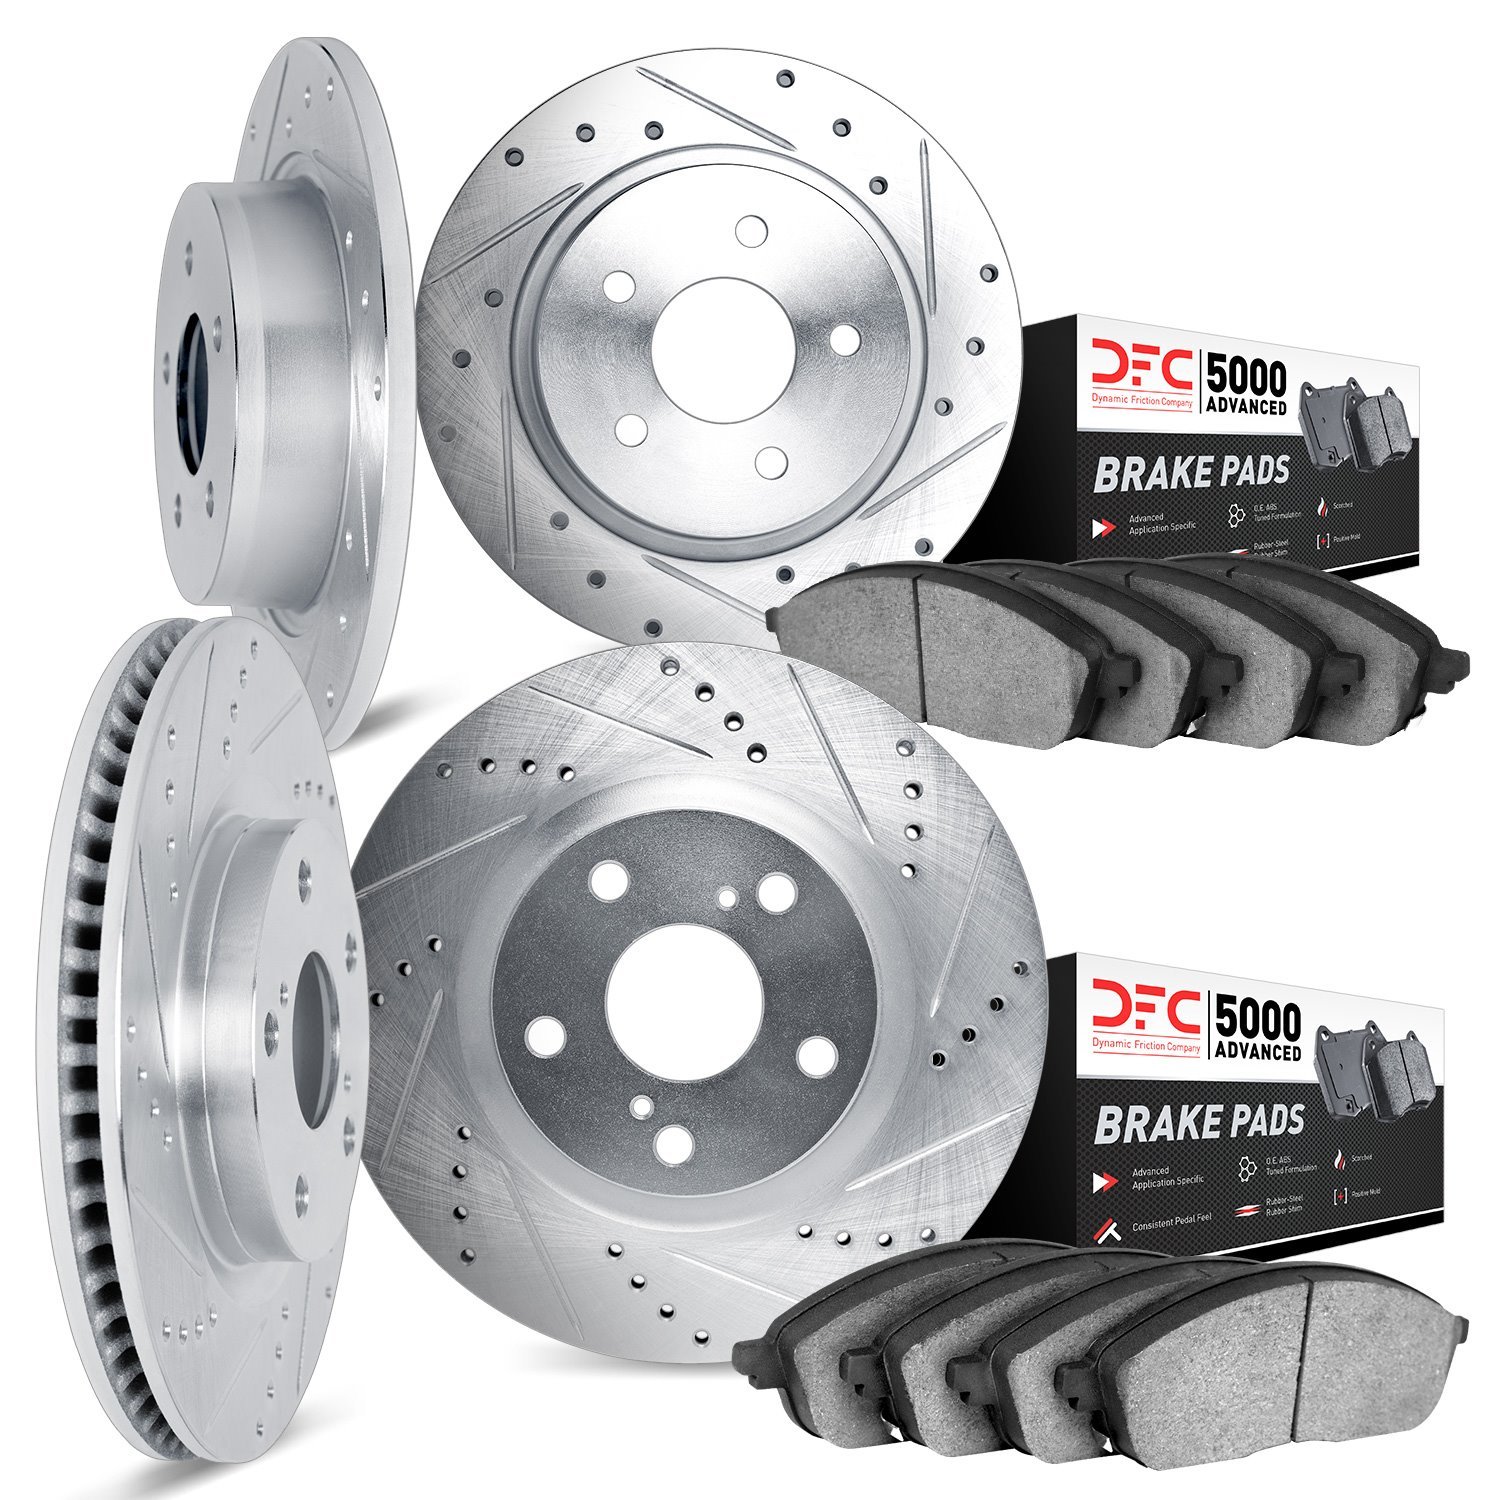 7504-68001 Drilled/Slotted Brake Rotors w/5000 Advanced Brake Pads Kit [Silver], 1995-1996 Infiniti/Nissan, Position: Front and